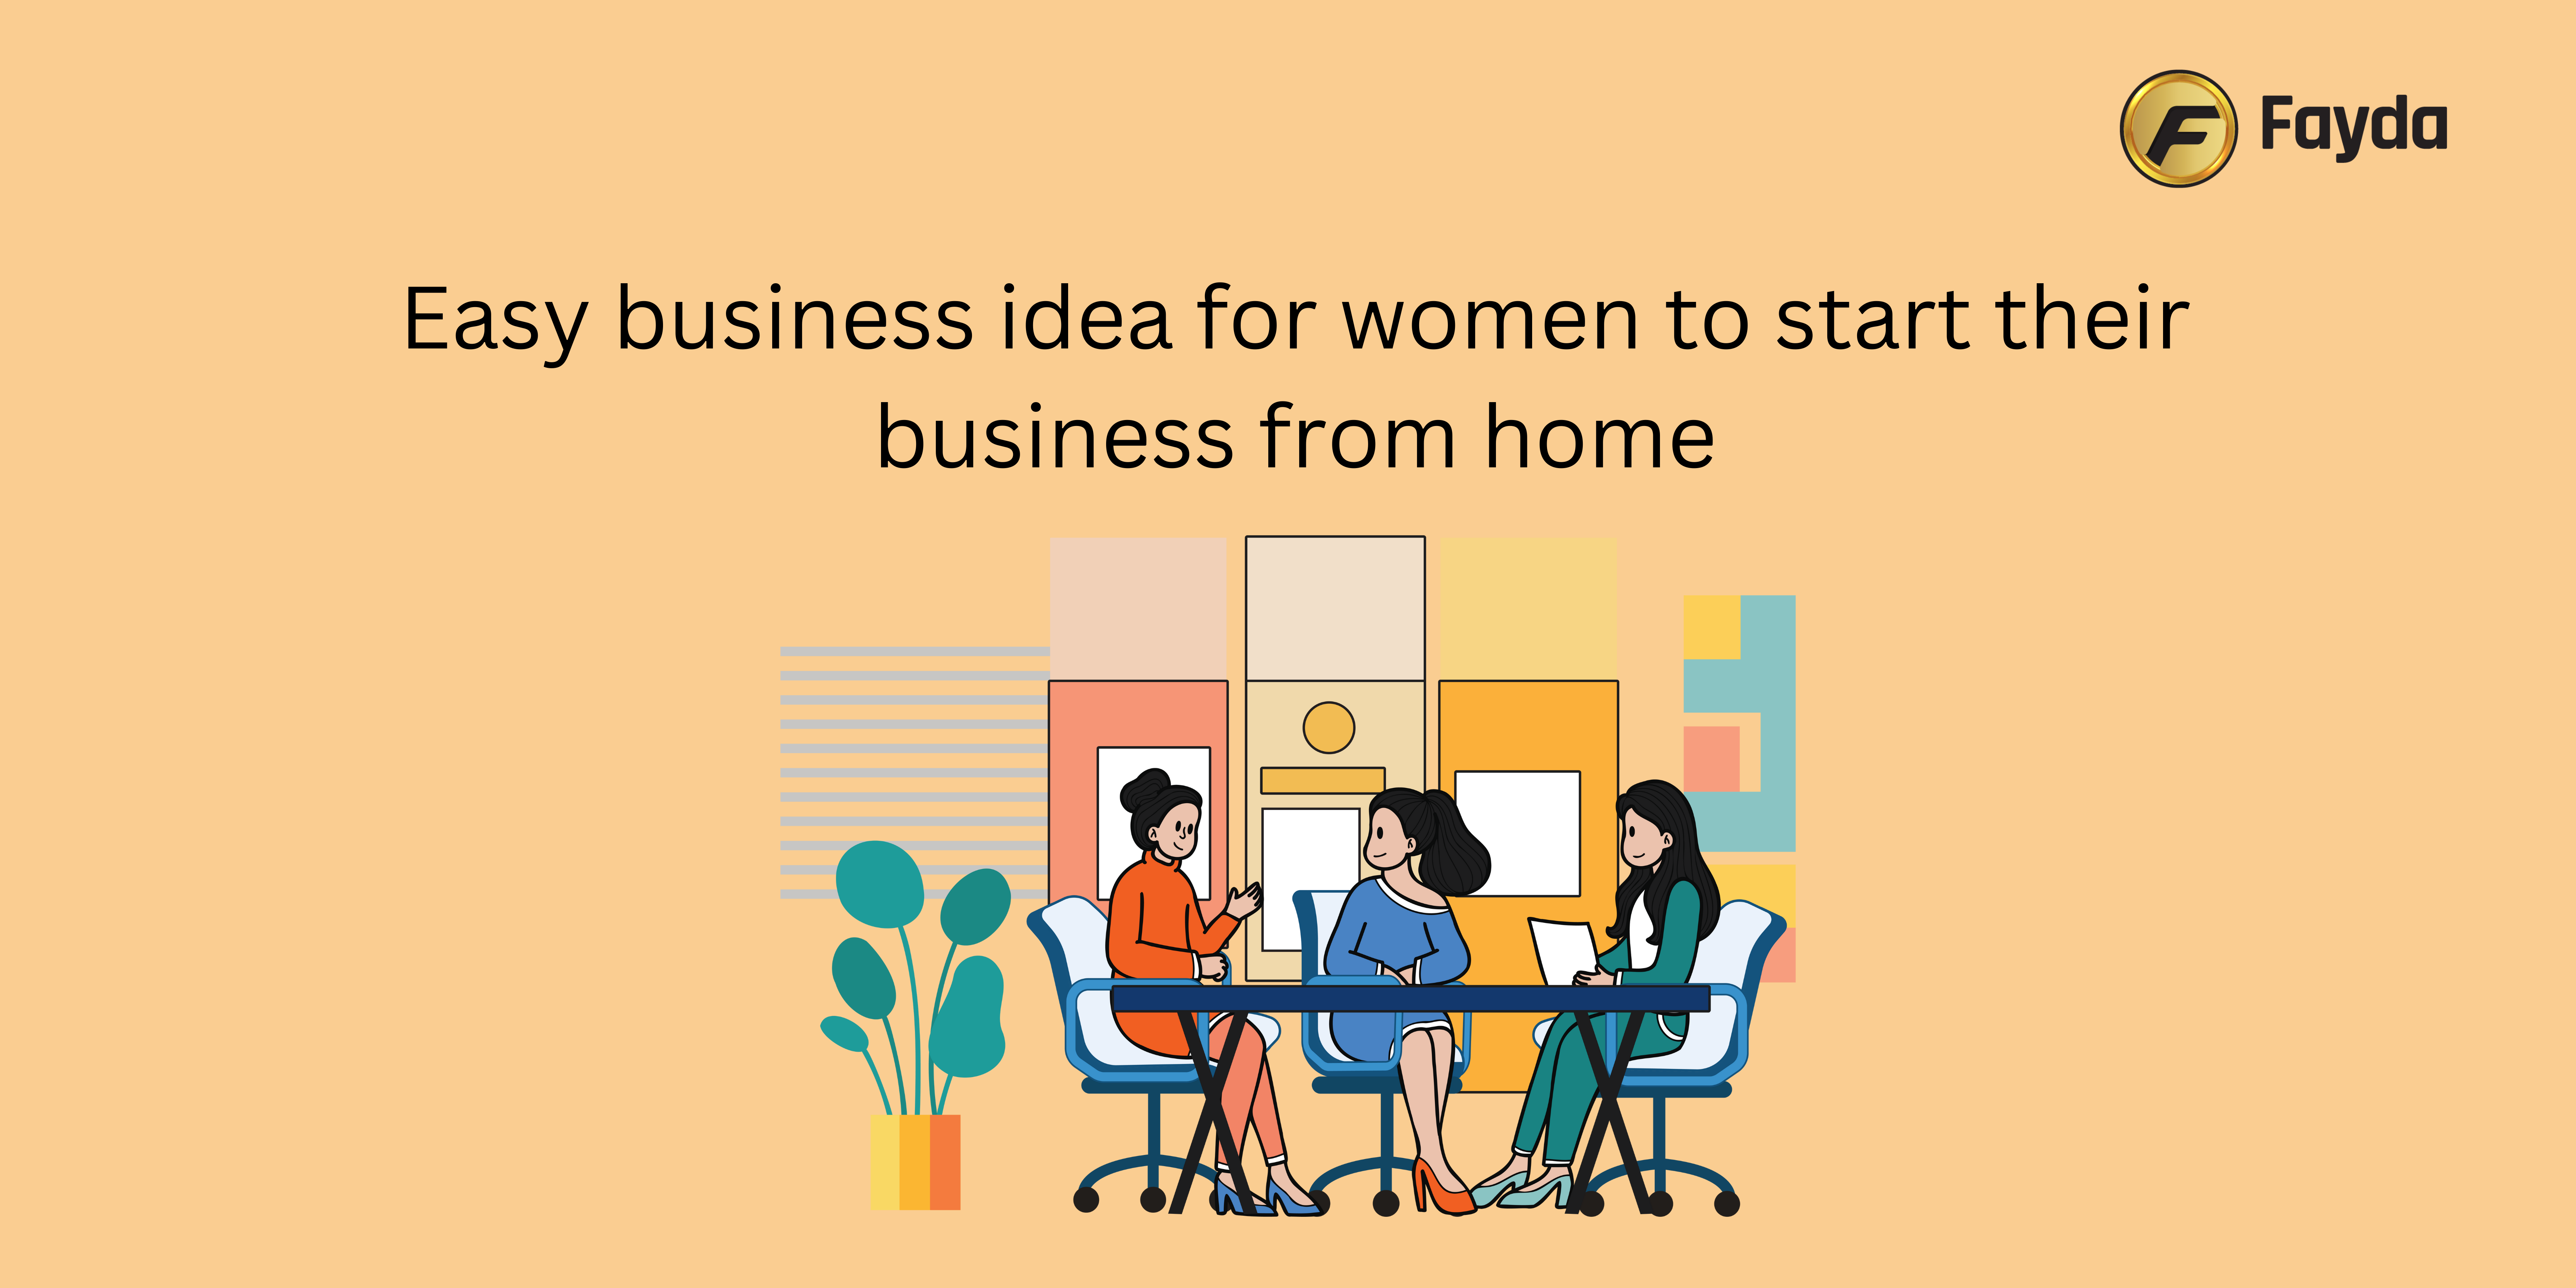 Easy business idea for women to start their business from home